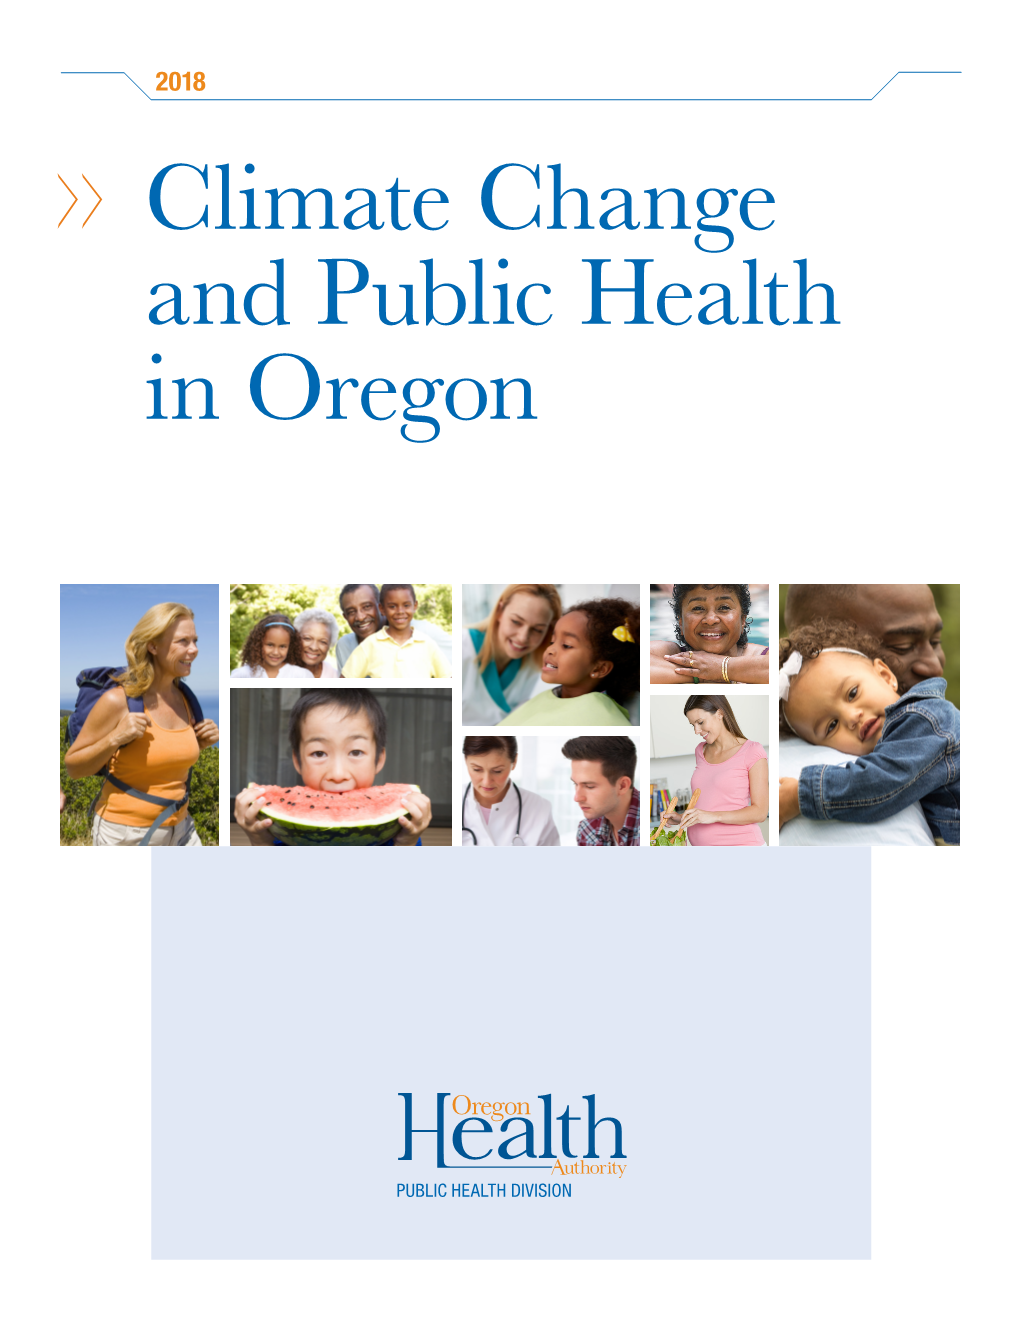 2018 Climate Change and Public Health in Oregon